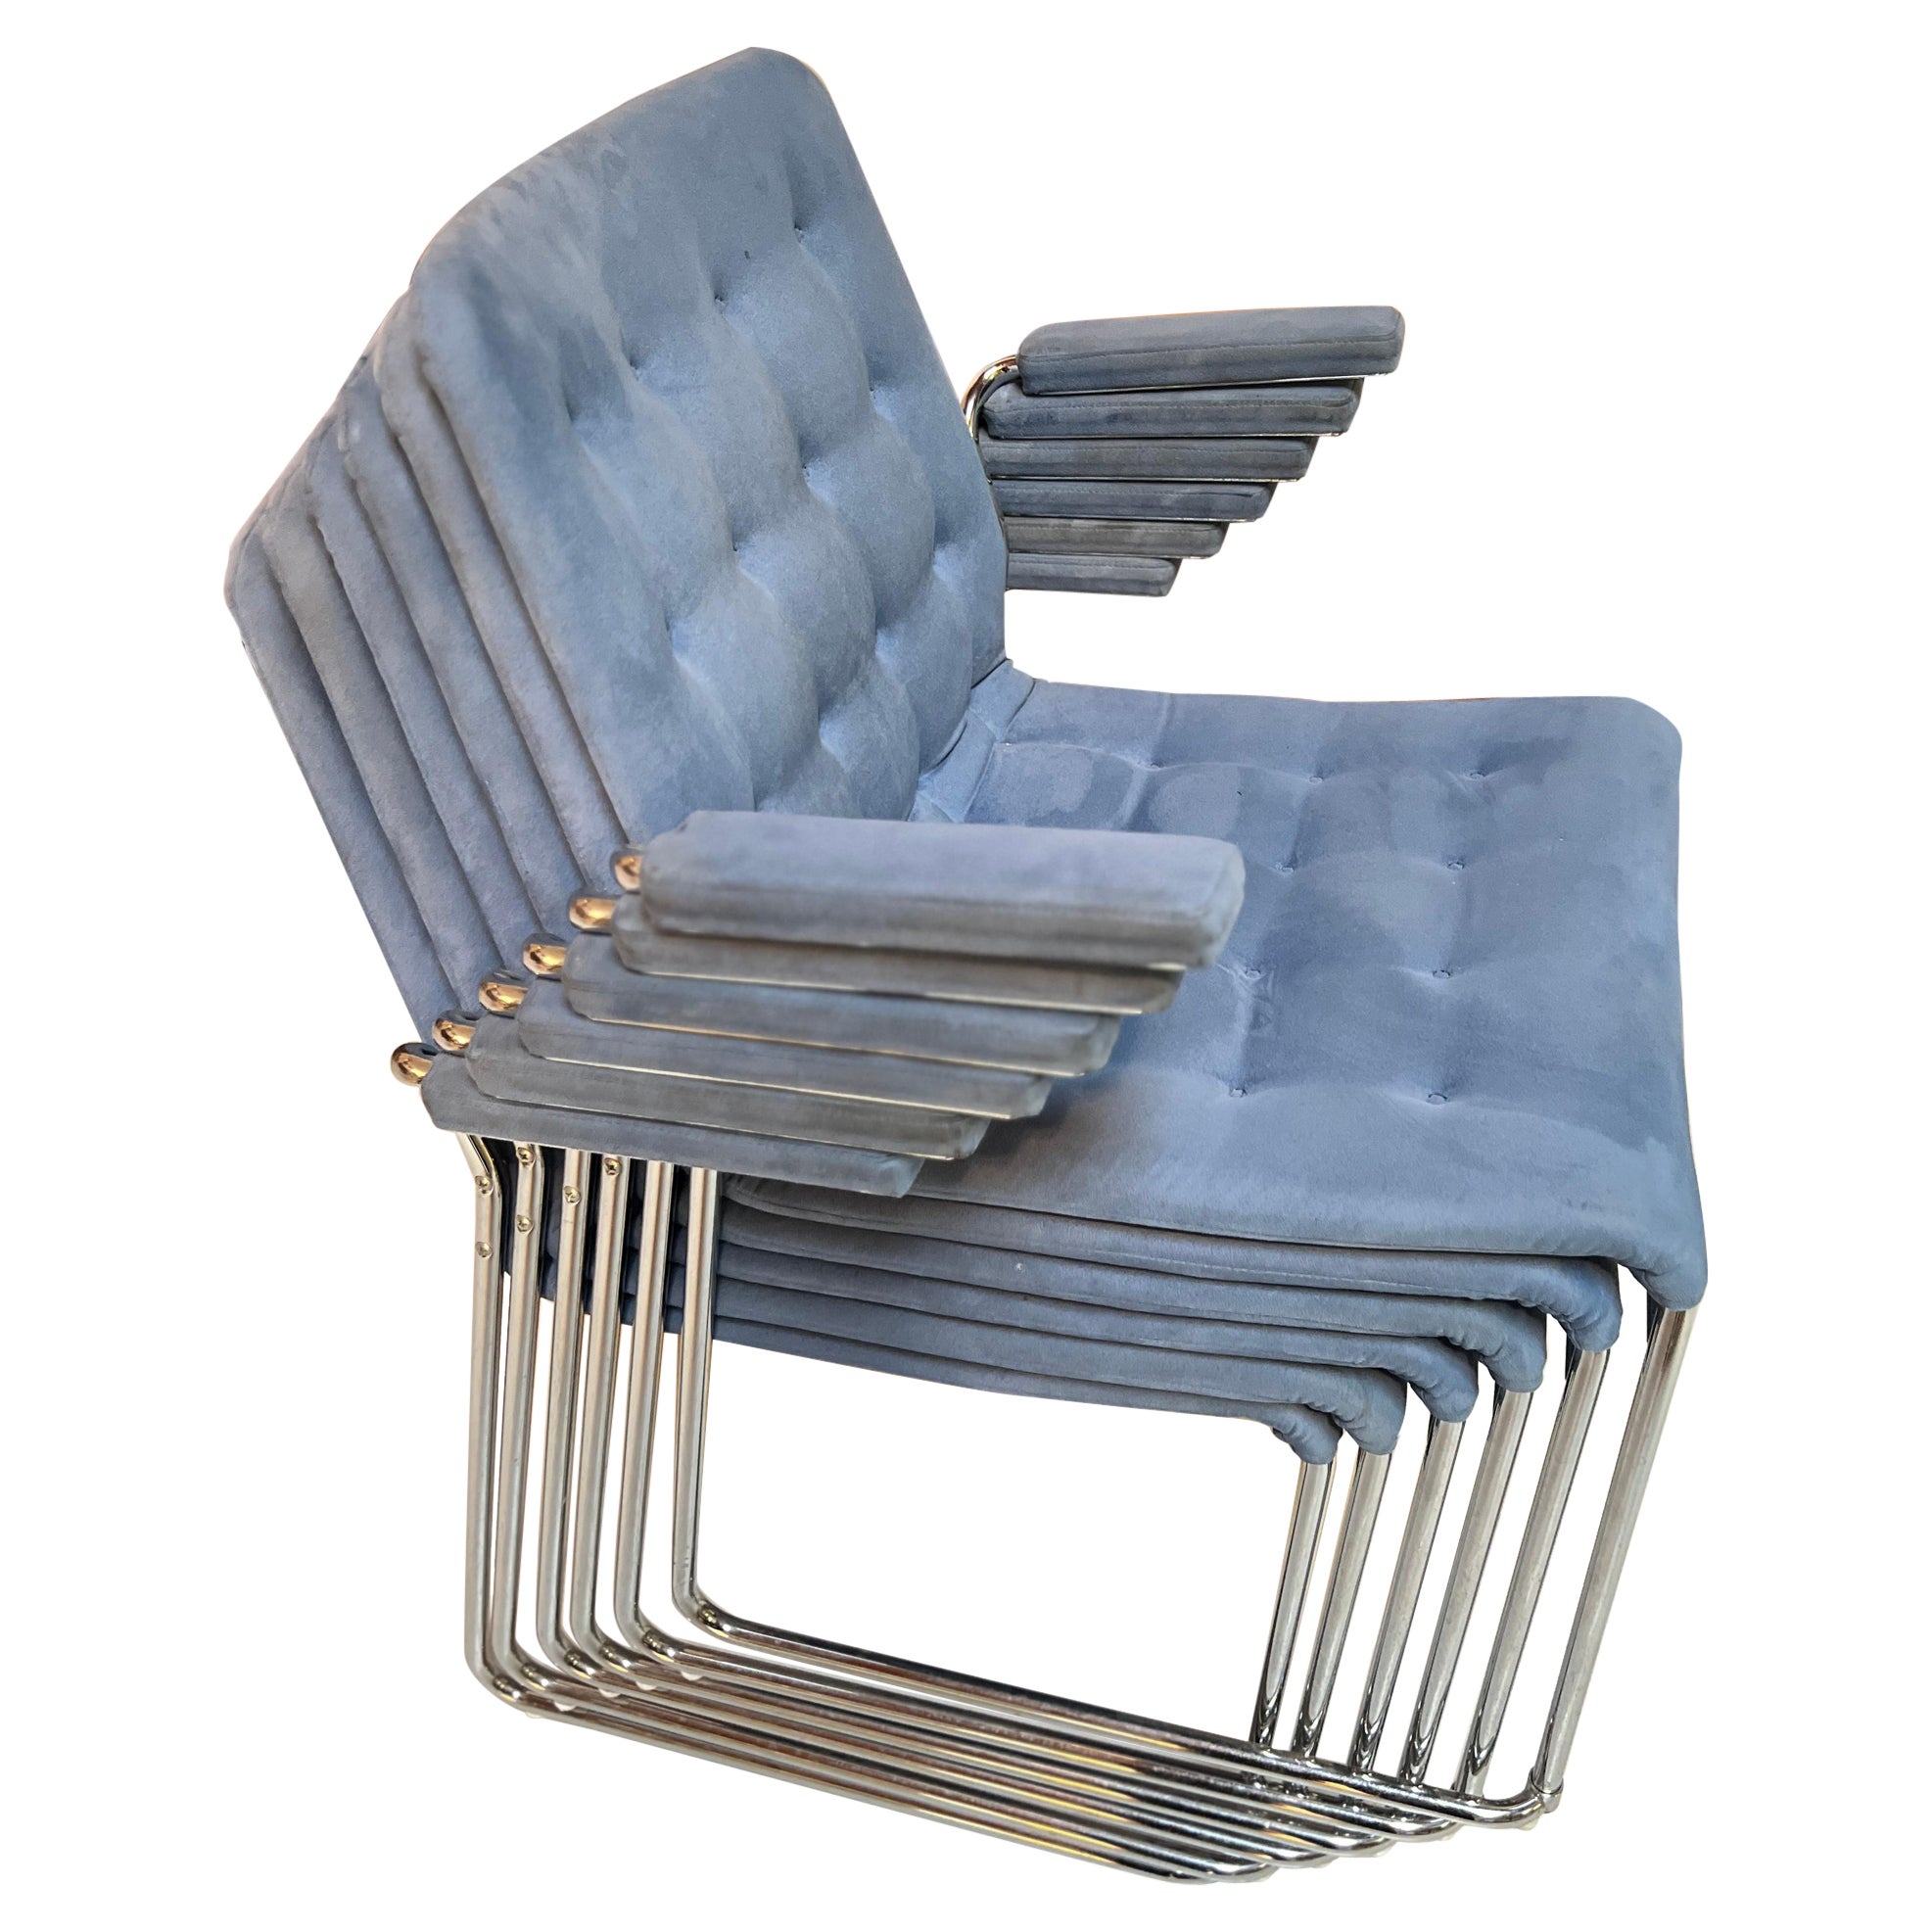 Set of 6 "mio" stackable chairs by bruno mathsson for DUX circa 2003